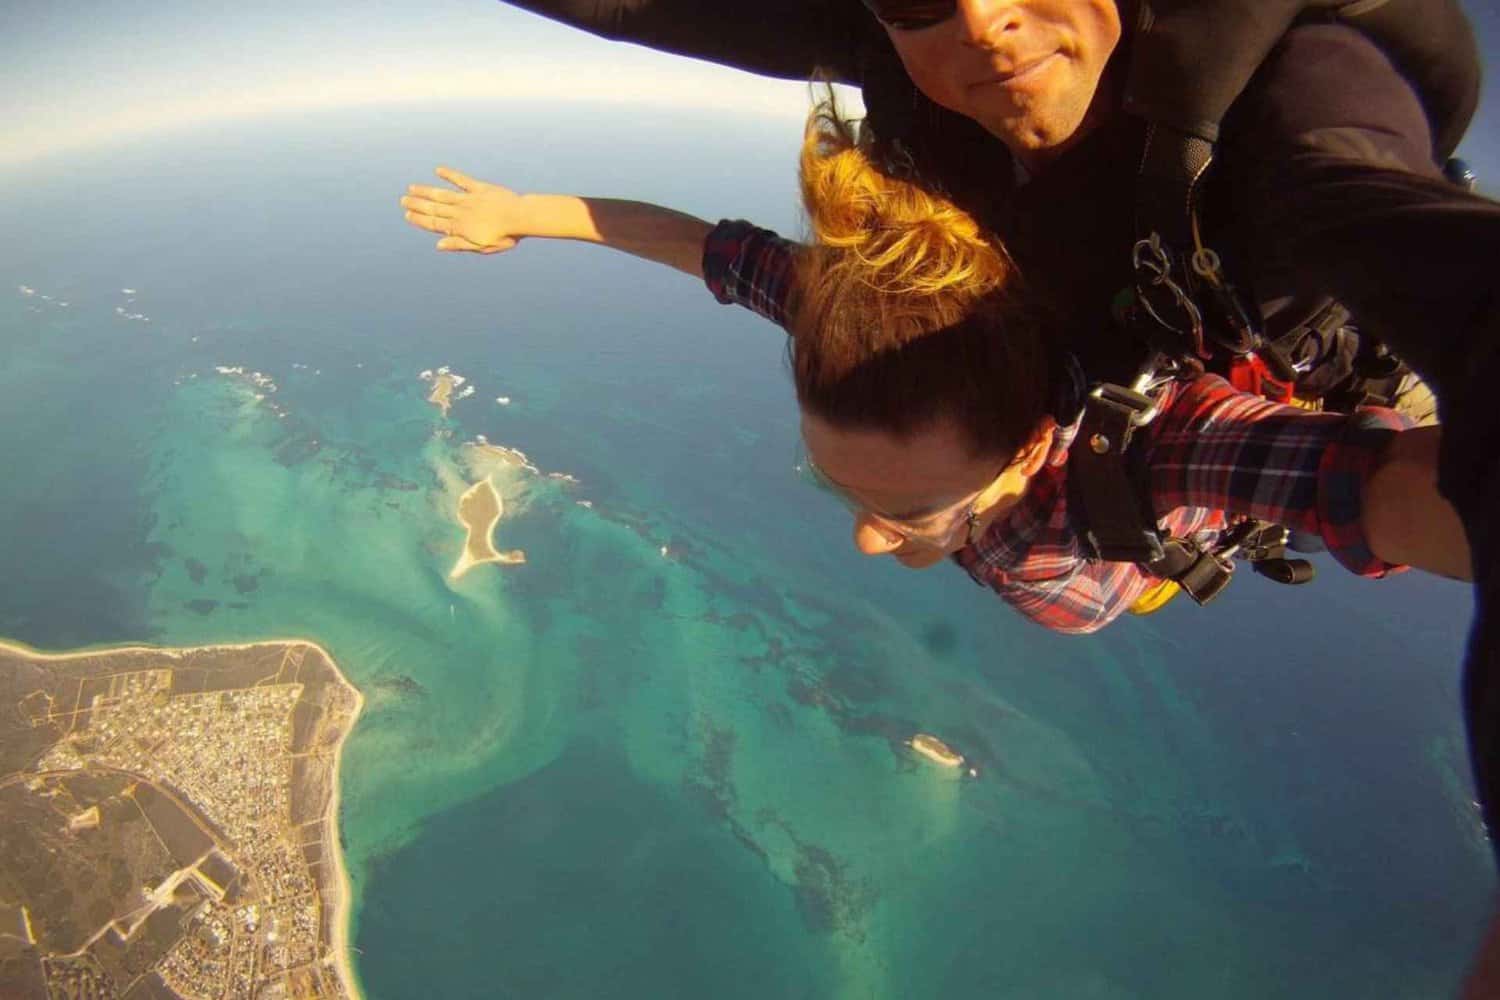 Exhilarating skydiving experience over Jurien Bay during the Perth to Exmouth adventure, featuring the jumper (me!) looking down at the stunning ocean below, while the instructor captures a thrilling selfie of the tandem dive